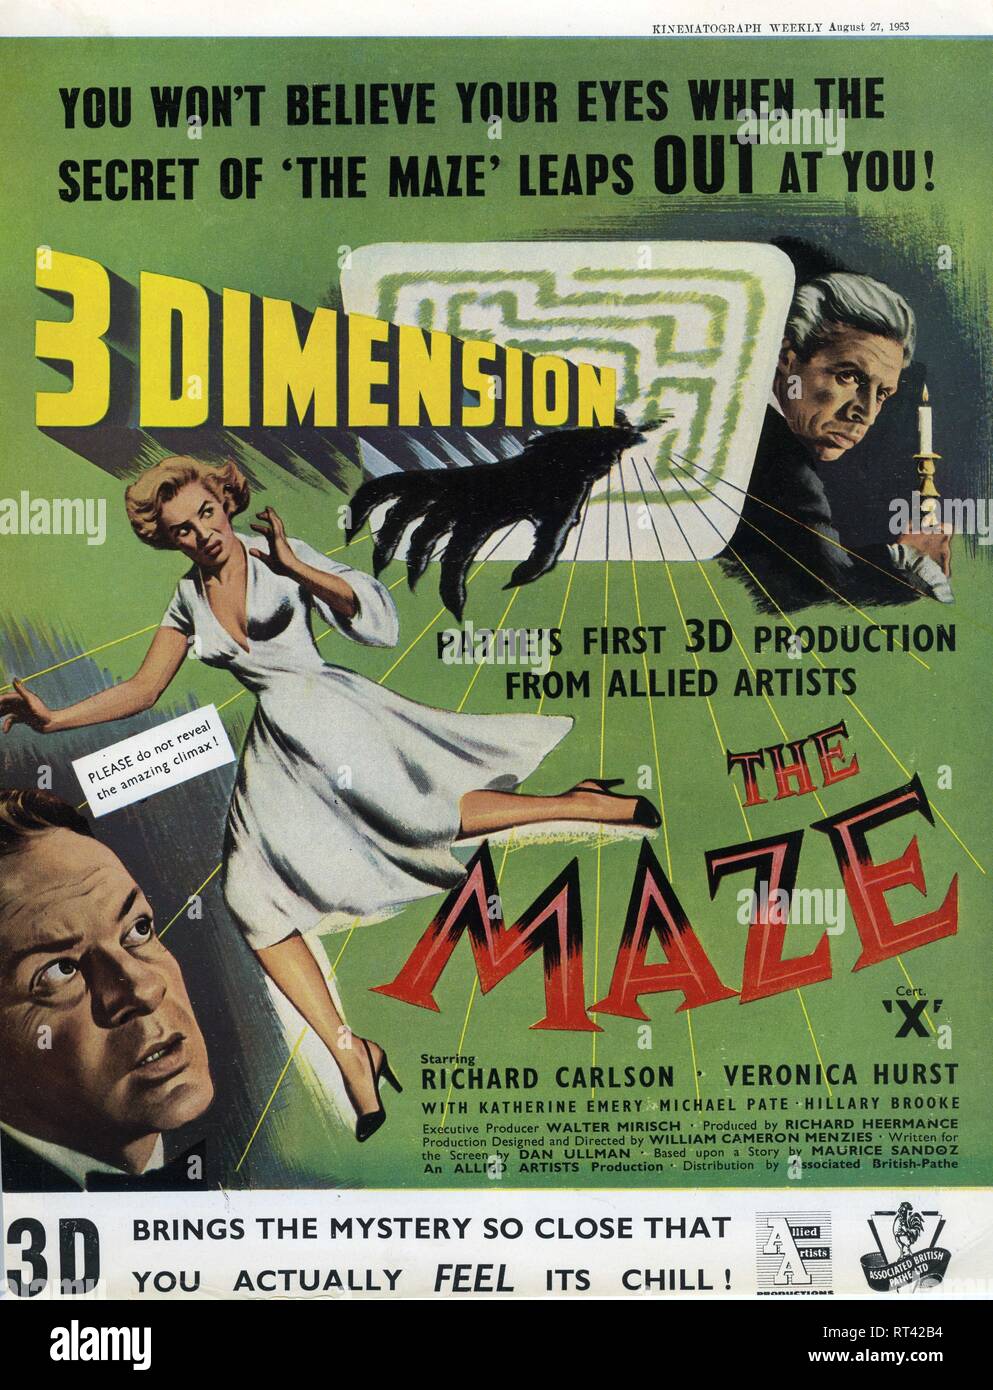 Richard Carlson Veronica Hurst Michael Pate THE MAZE 1953 Production Designed and Directed by William Cameron Menzies 3D Stock Photo